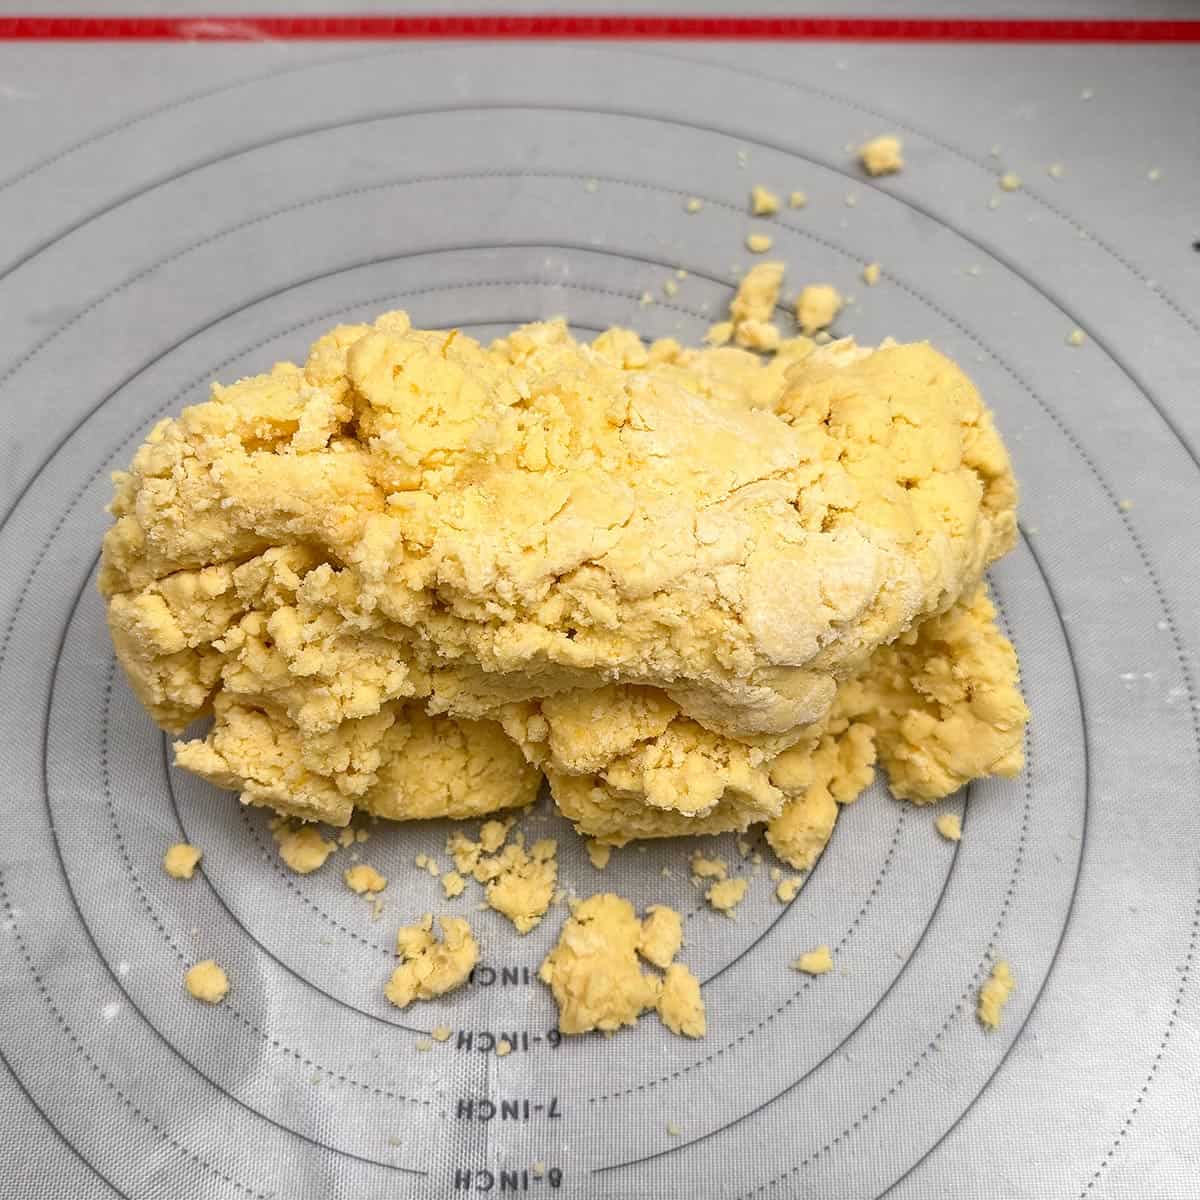 Cookie dough dumped onto a pastry mat. Looks dry and crumbly like playdough.